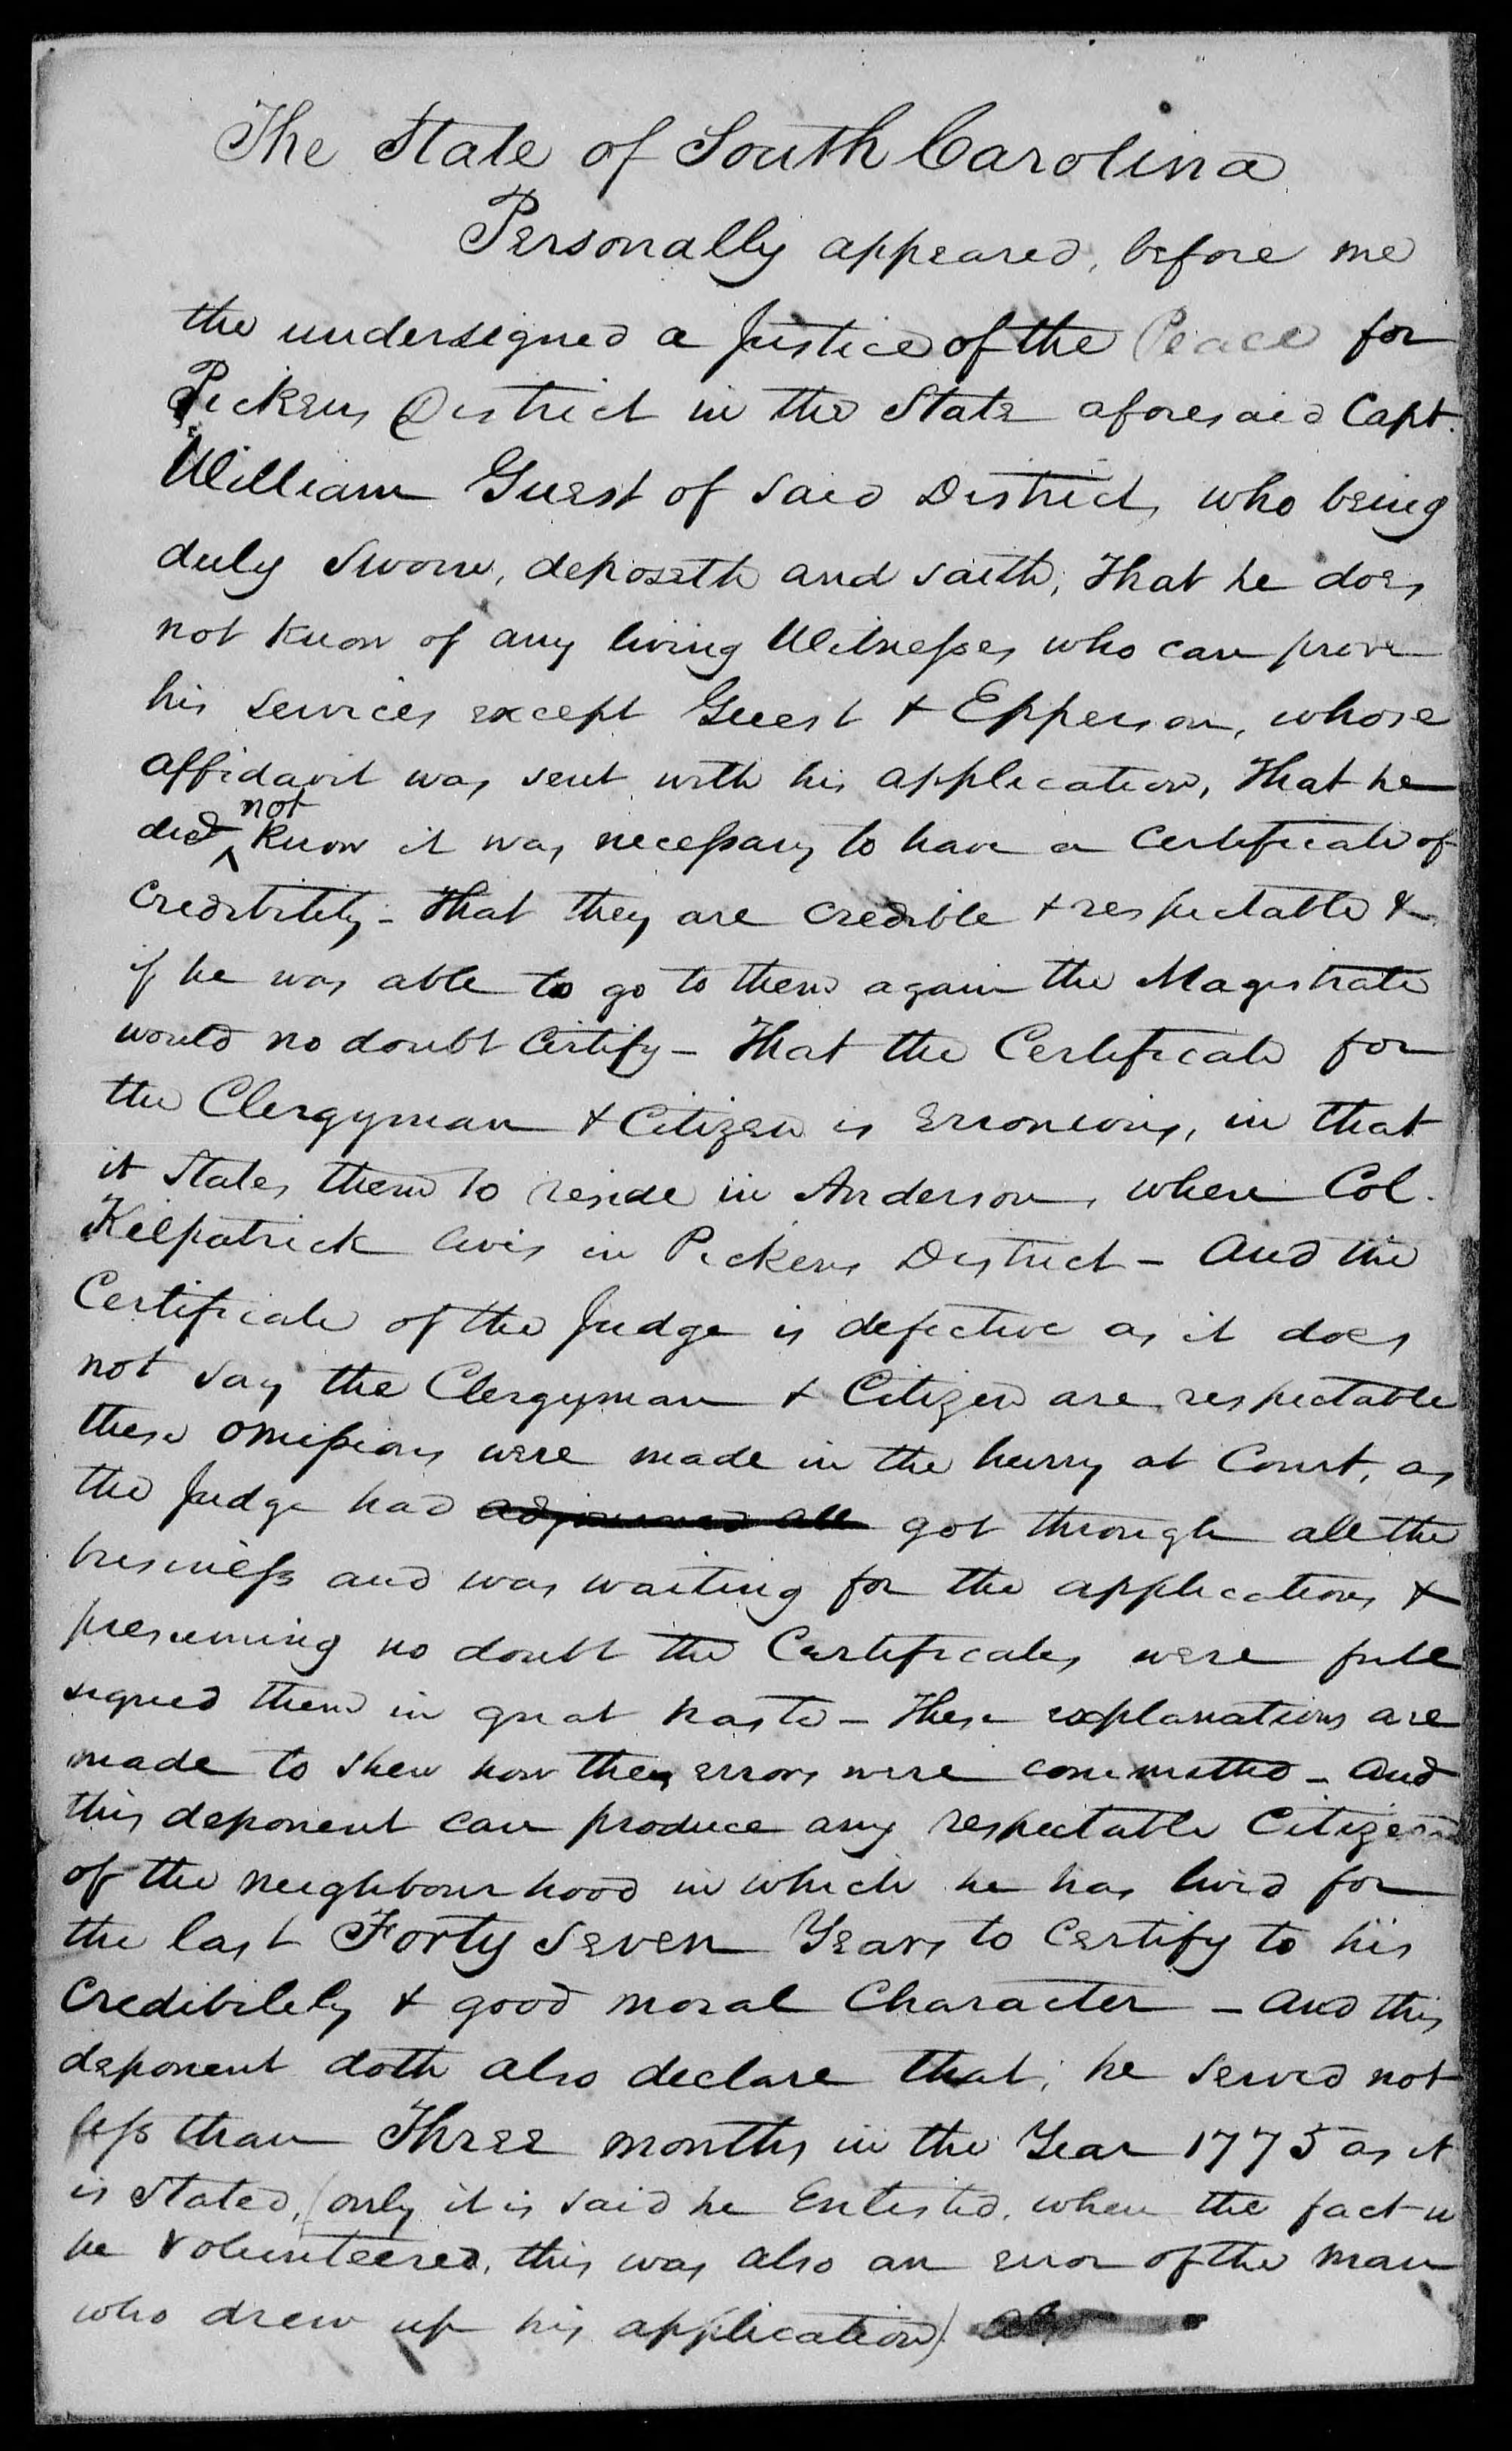 Application for a Veteran's Pension from William Guest, 9 August 1833, page 1